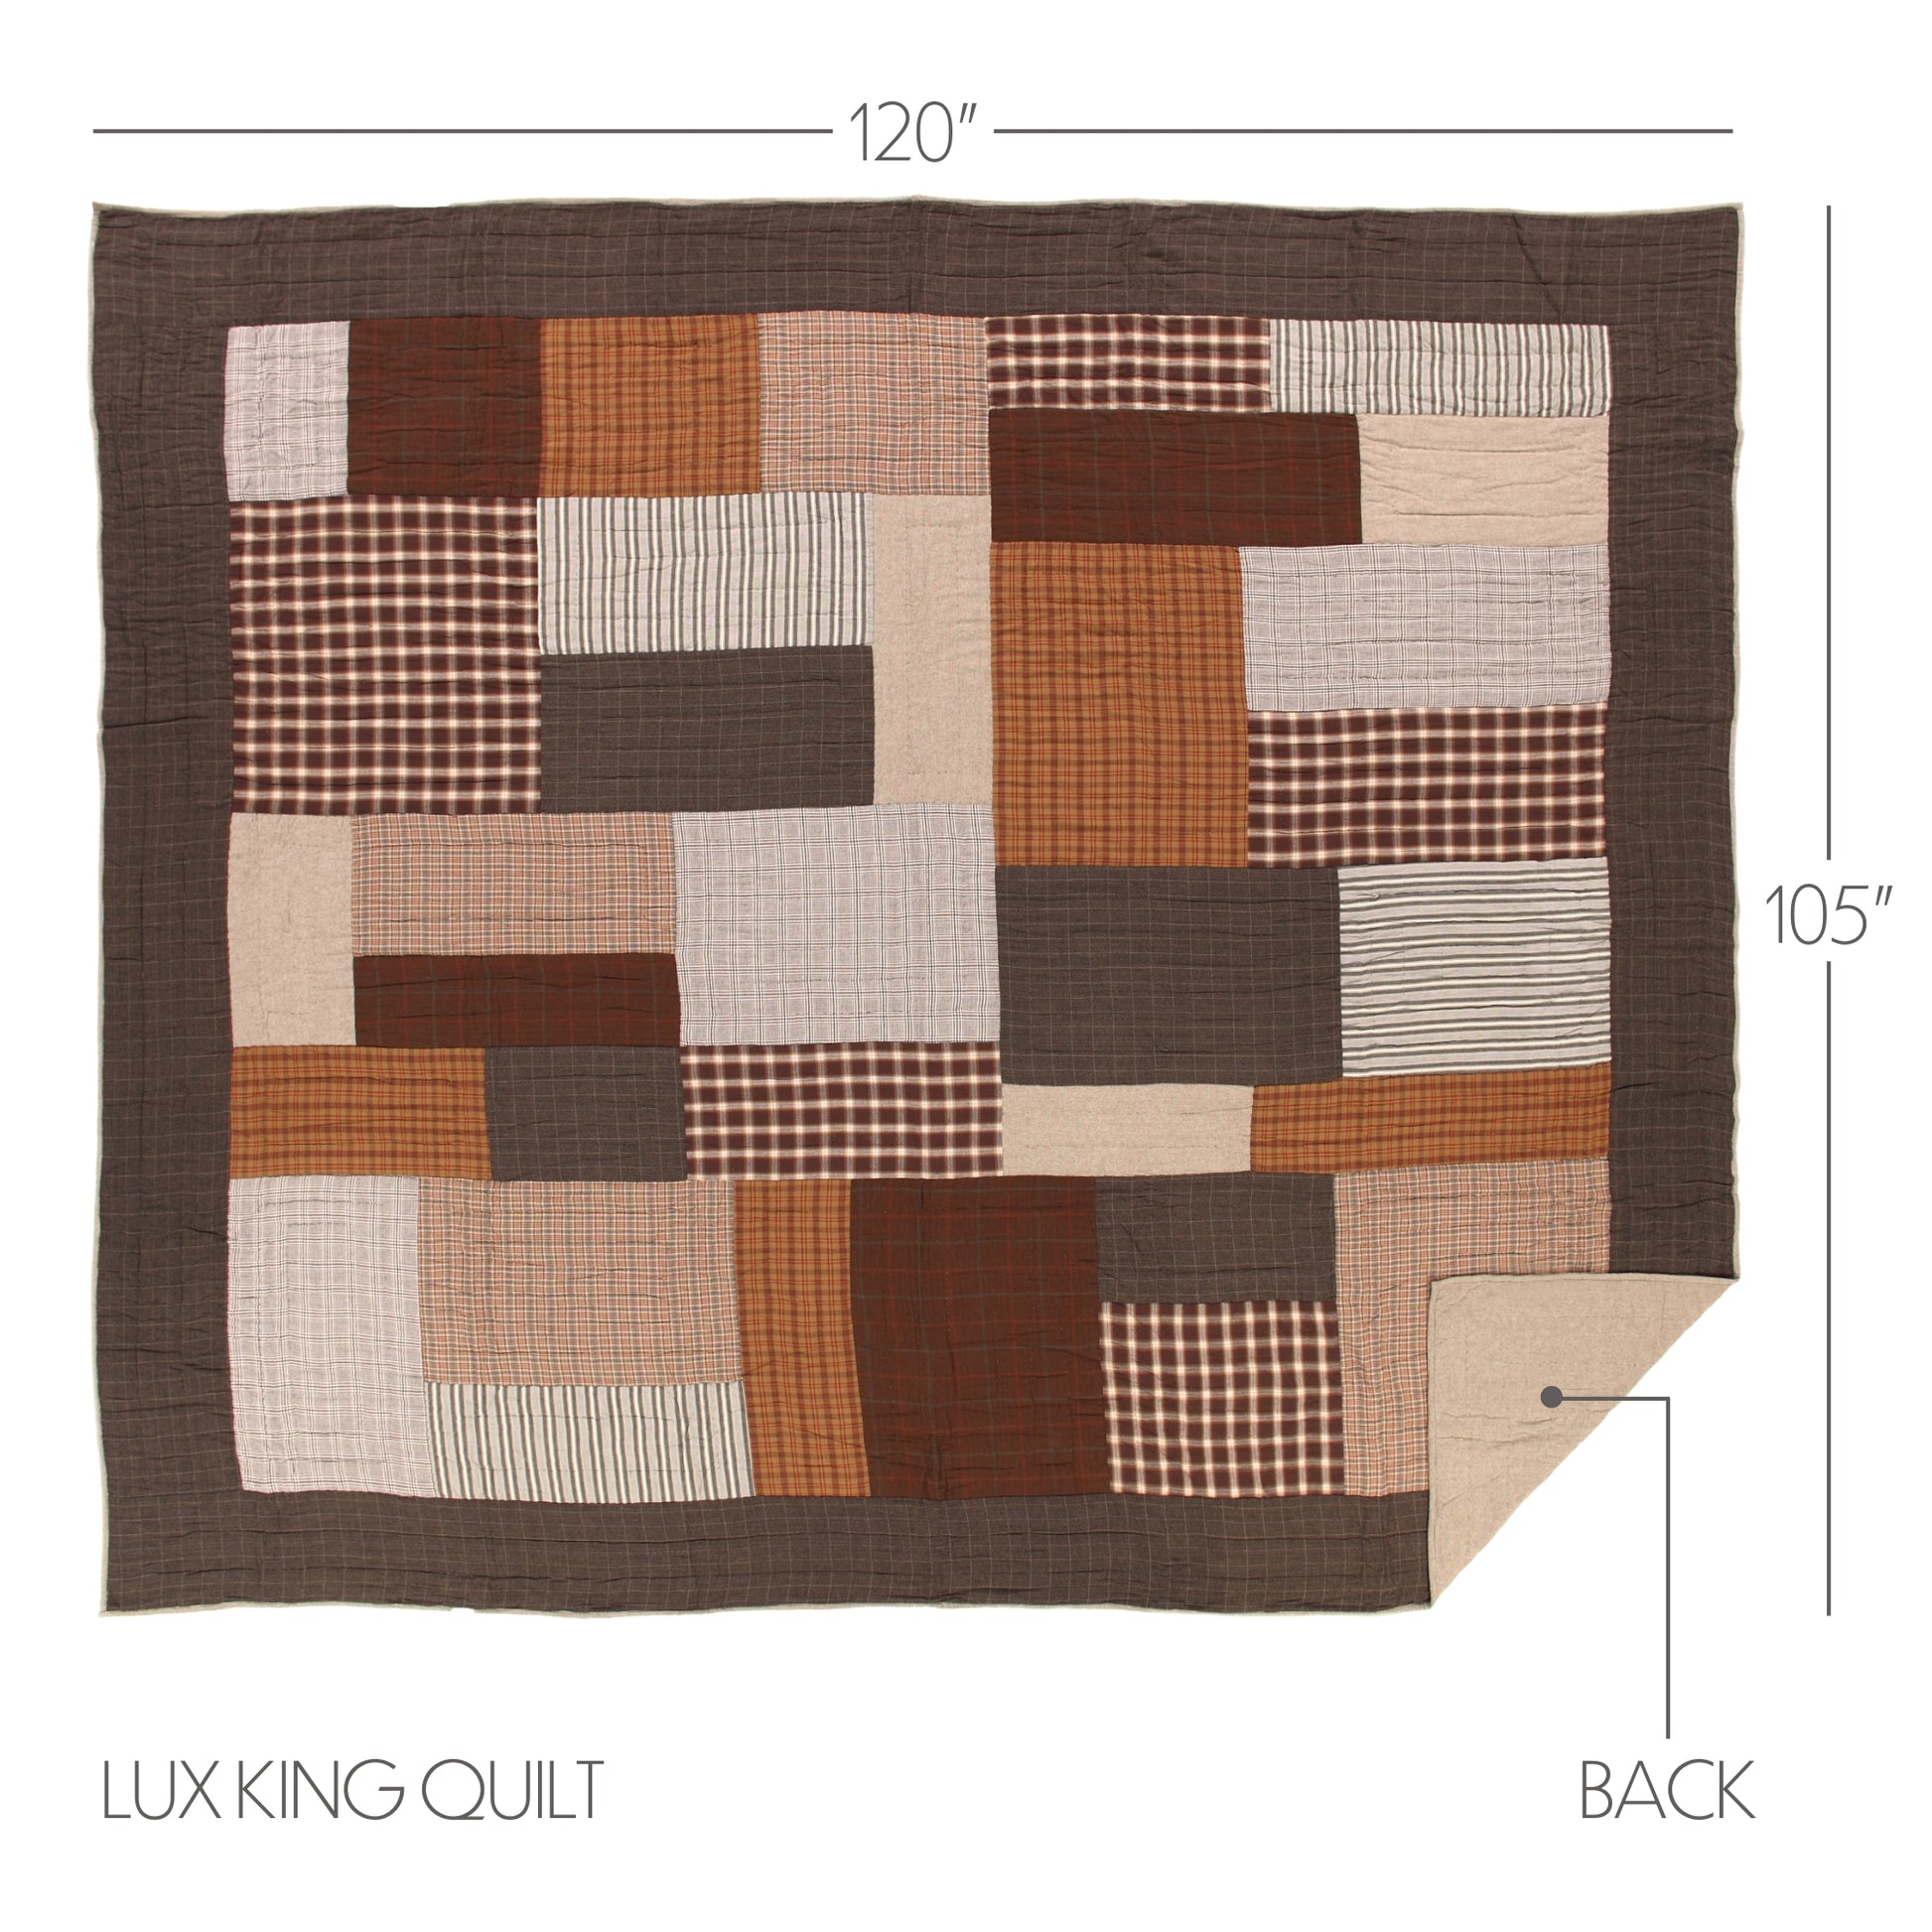 38016-Rory-Luxury-King-Quilt-120Wx105L-image-3